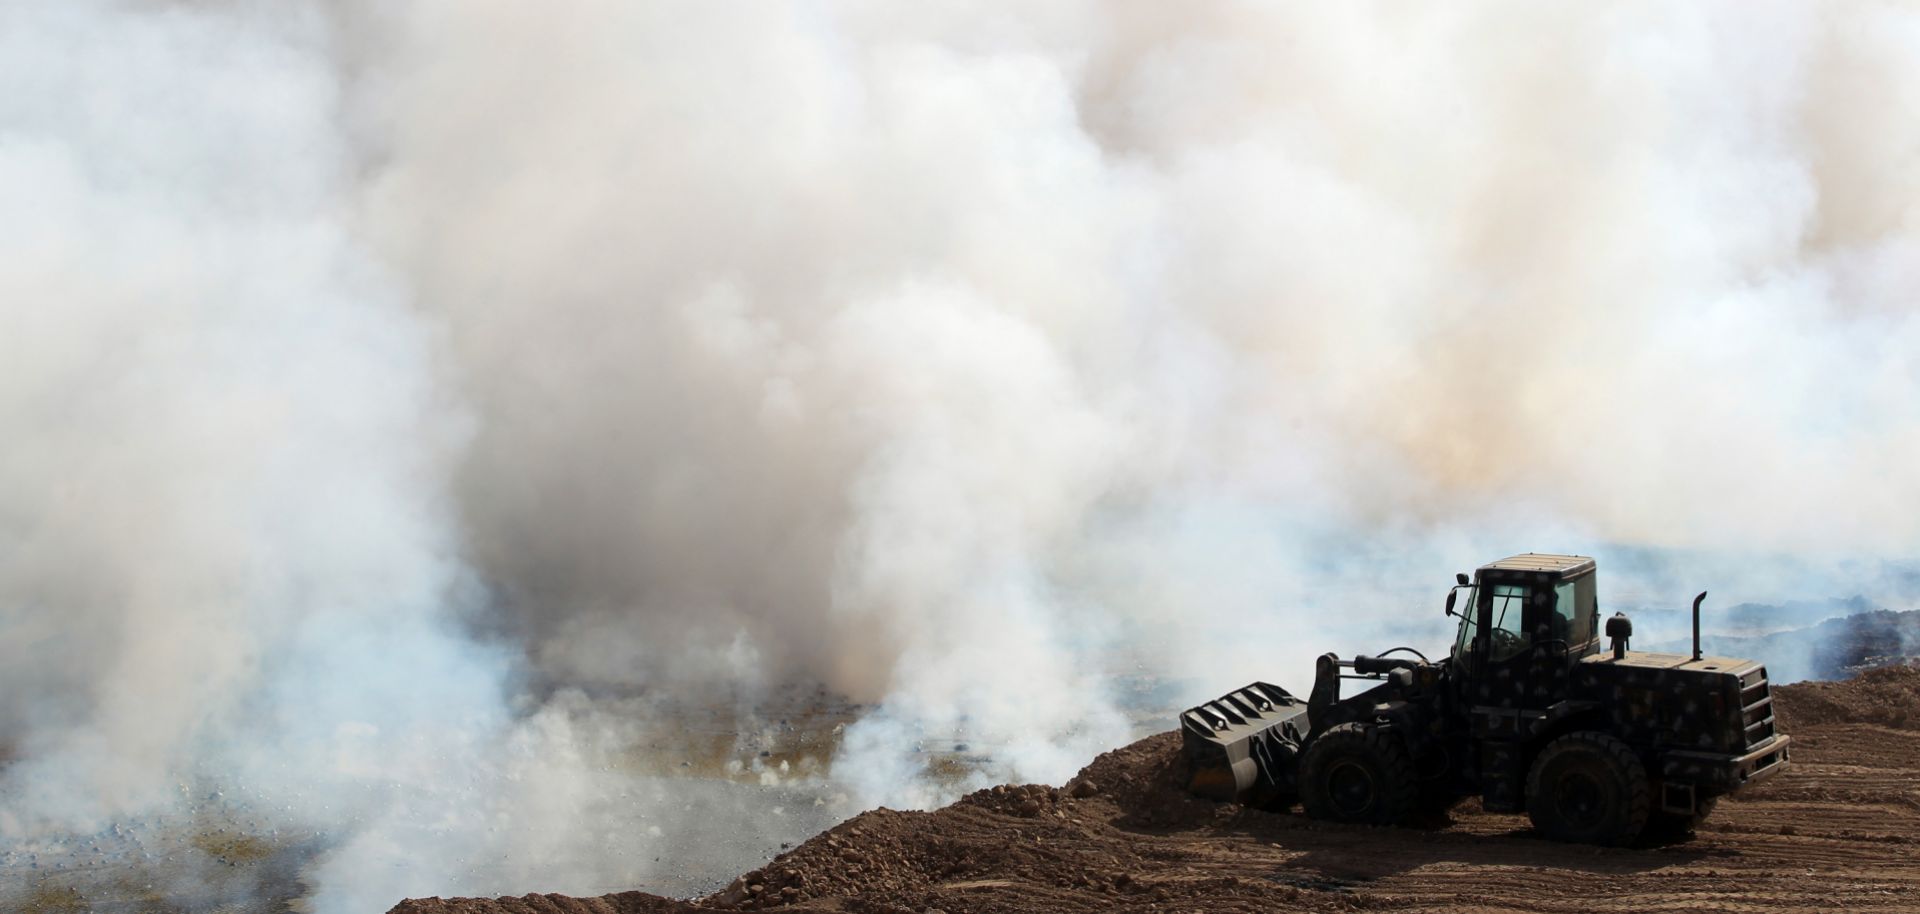 Iraqi forces attempt to extinguish a blaze set by the Islamic State in October 2016 south of Mosul.